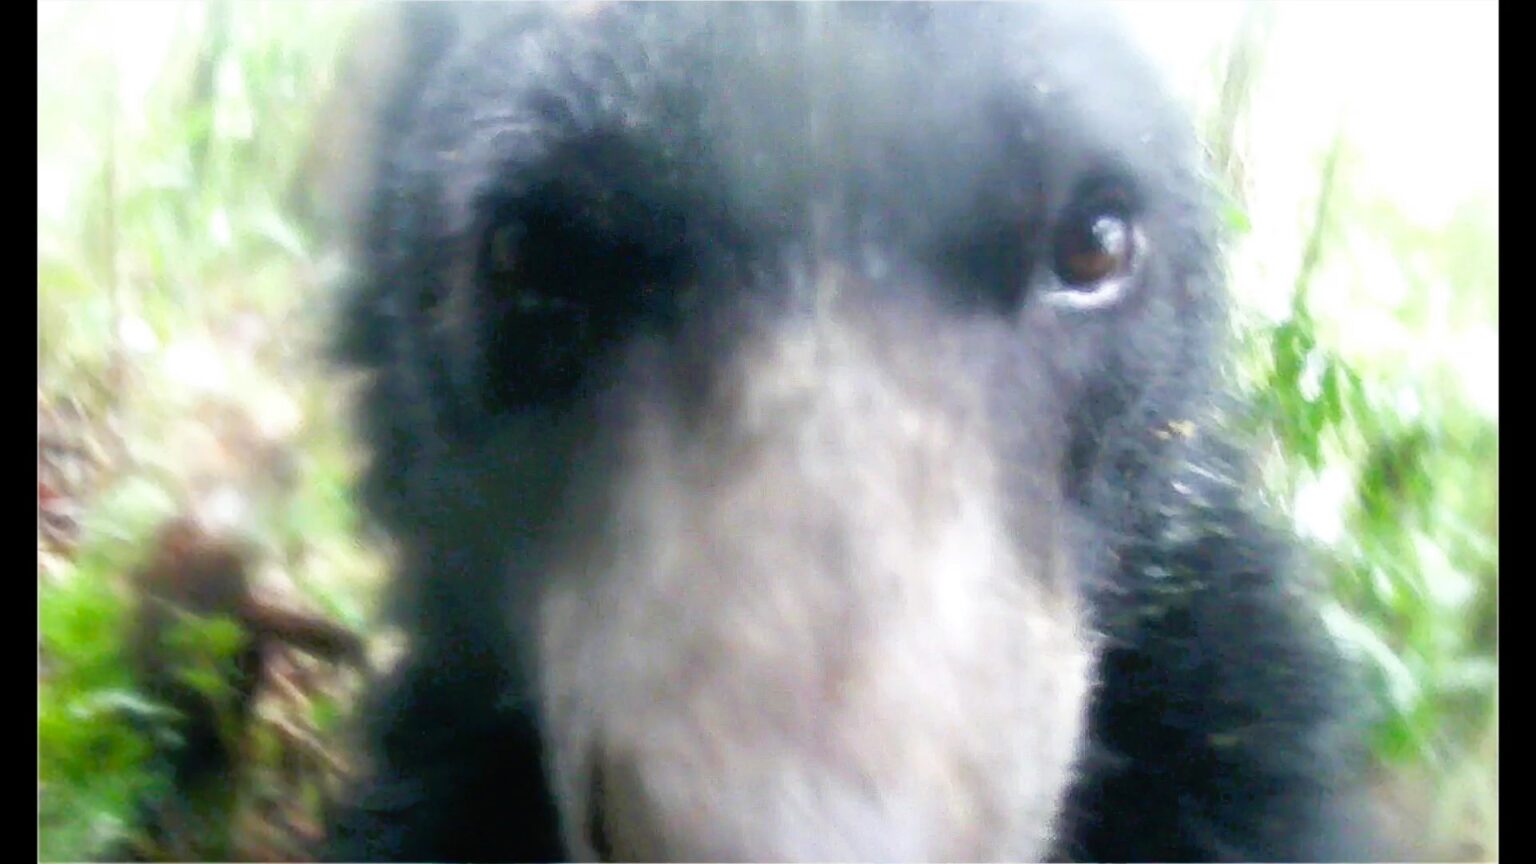 A spectacled bear in southern Colombia takes a 'selfie' with a hidden camera before calmly continuing its stroll. The camera, set up by local farmers, aids conservation efforts for this vulnerable species.